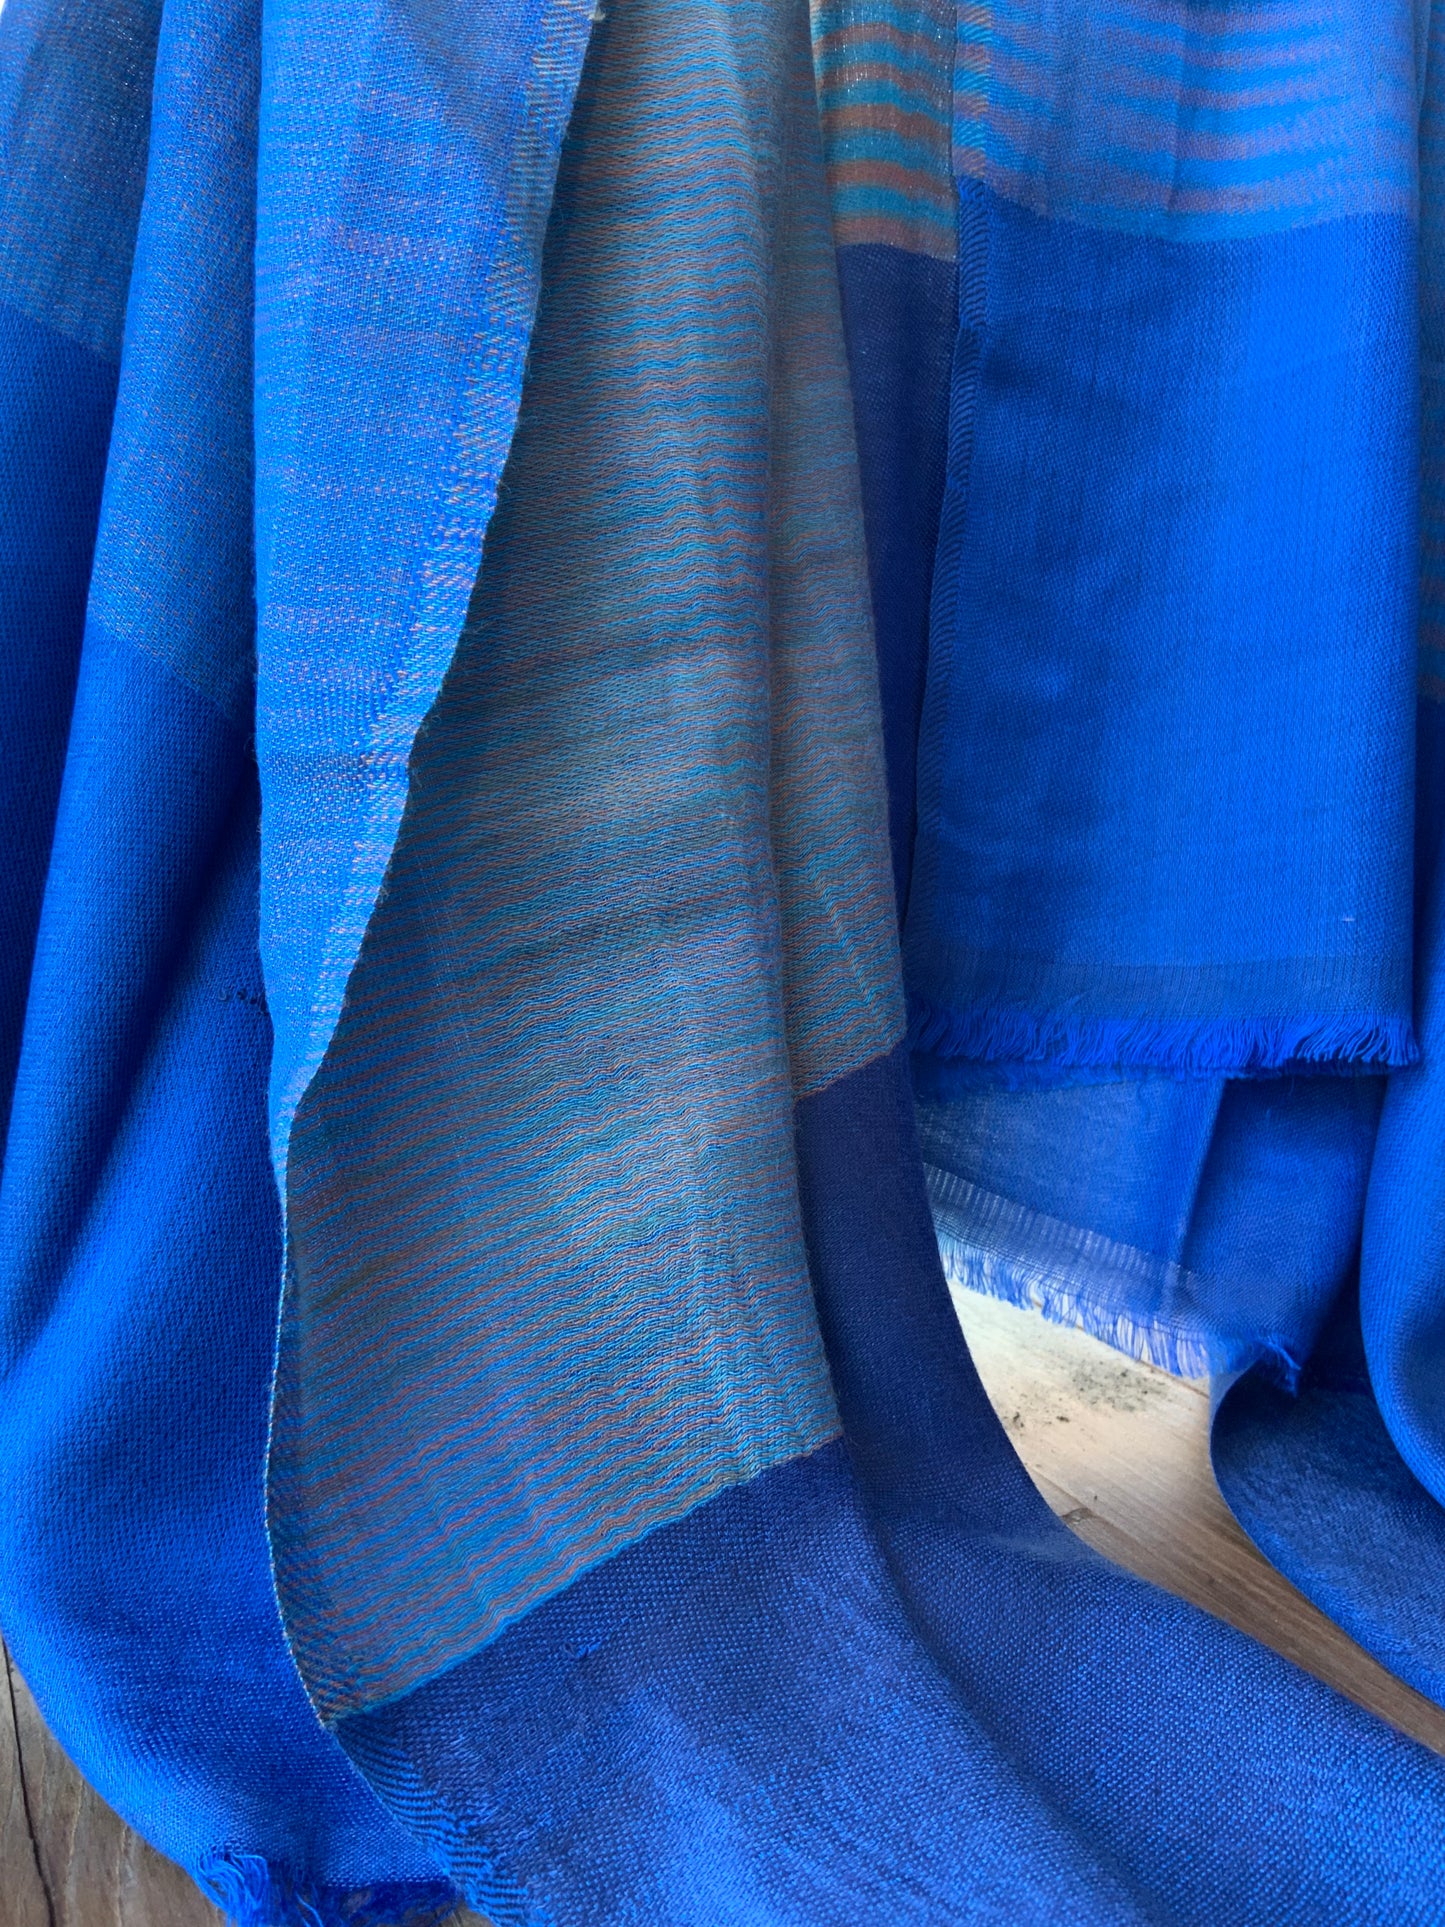 Classic Kashmir shawl in Blue with Copper Highlights #BlueShawl #ClassicShawl #kashmirShawl - DharBazaar